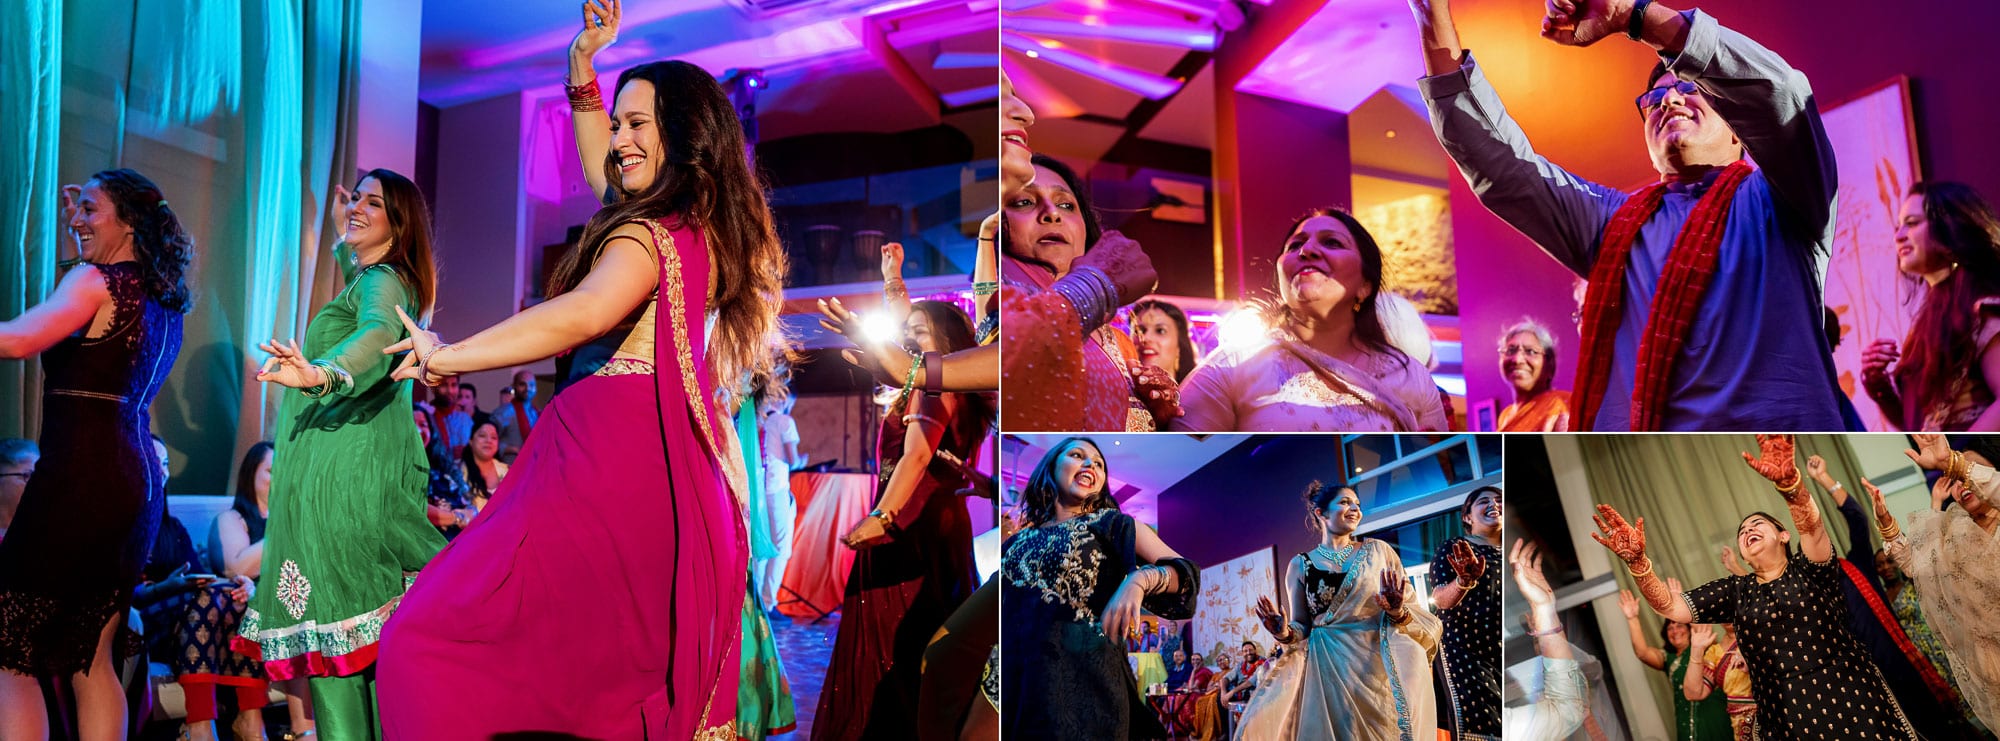 More fun and dancing the second night at this traditional Hindu Muslim wedding!